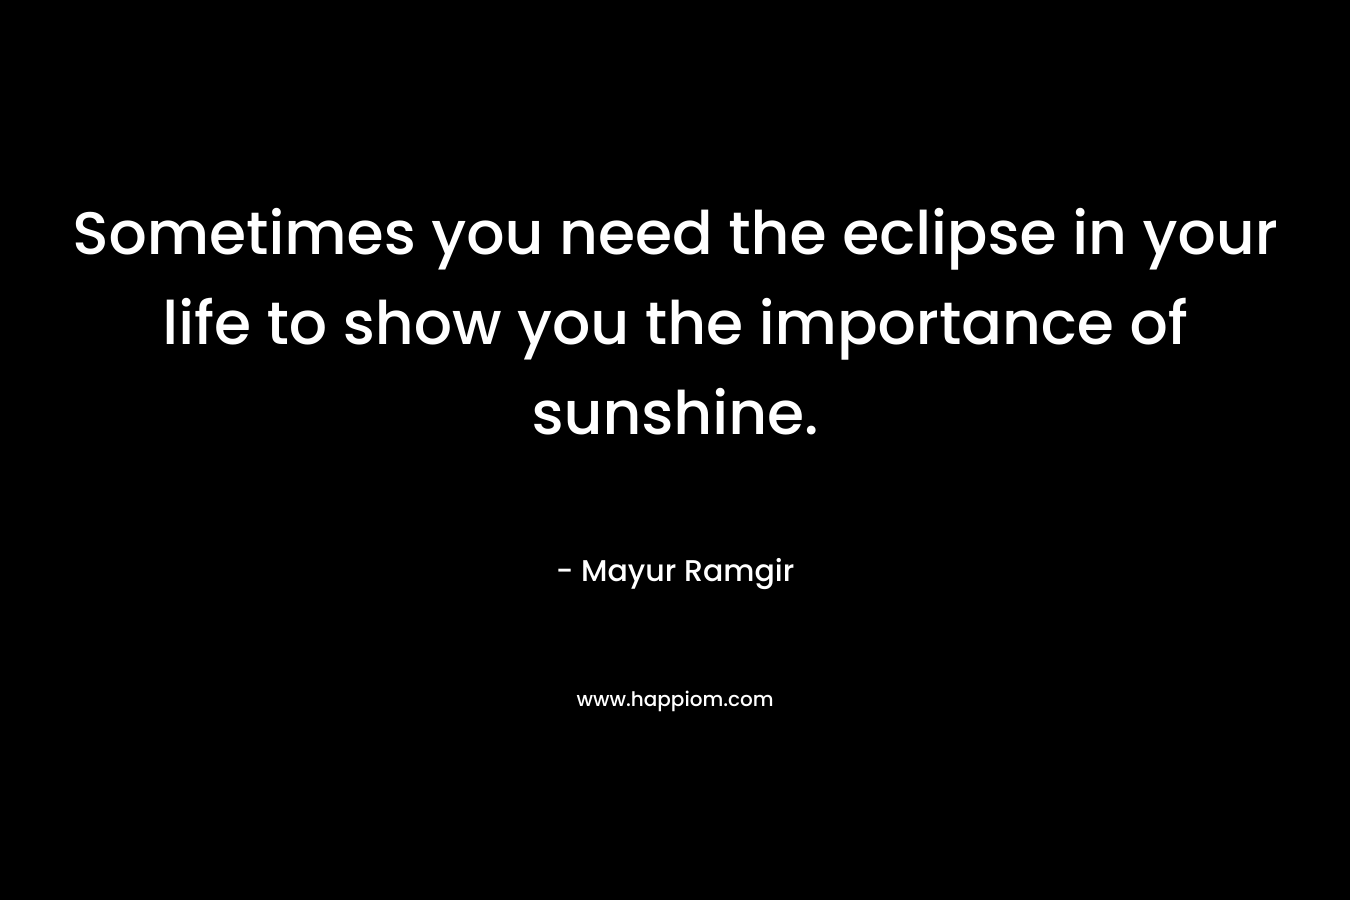 Sometimes you need the eclipse in your life to show you the importance of sunshine.